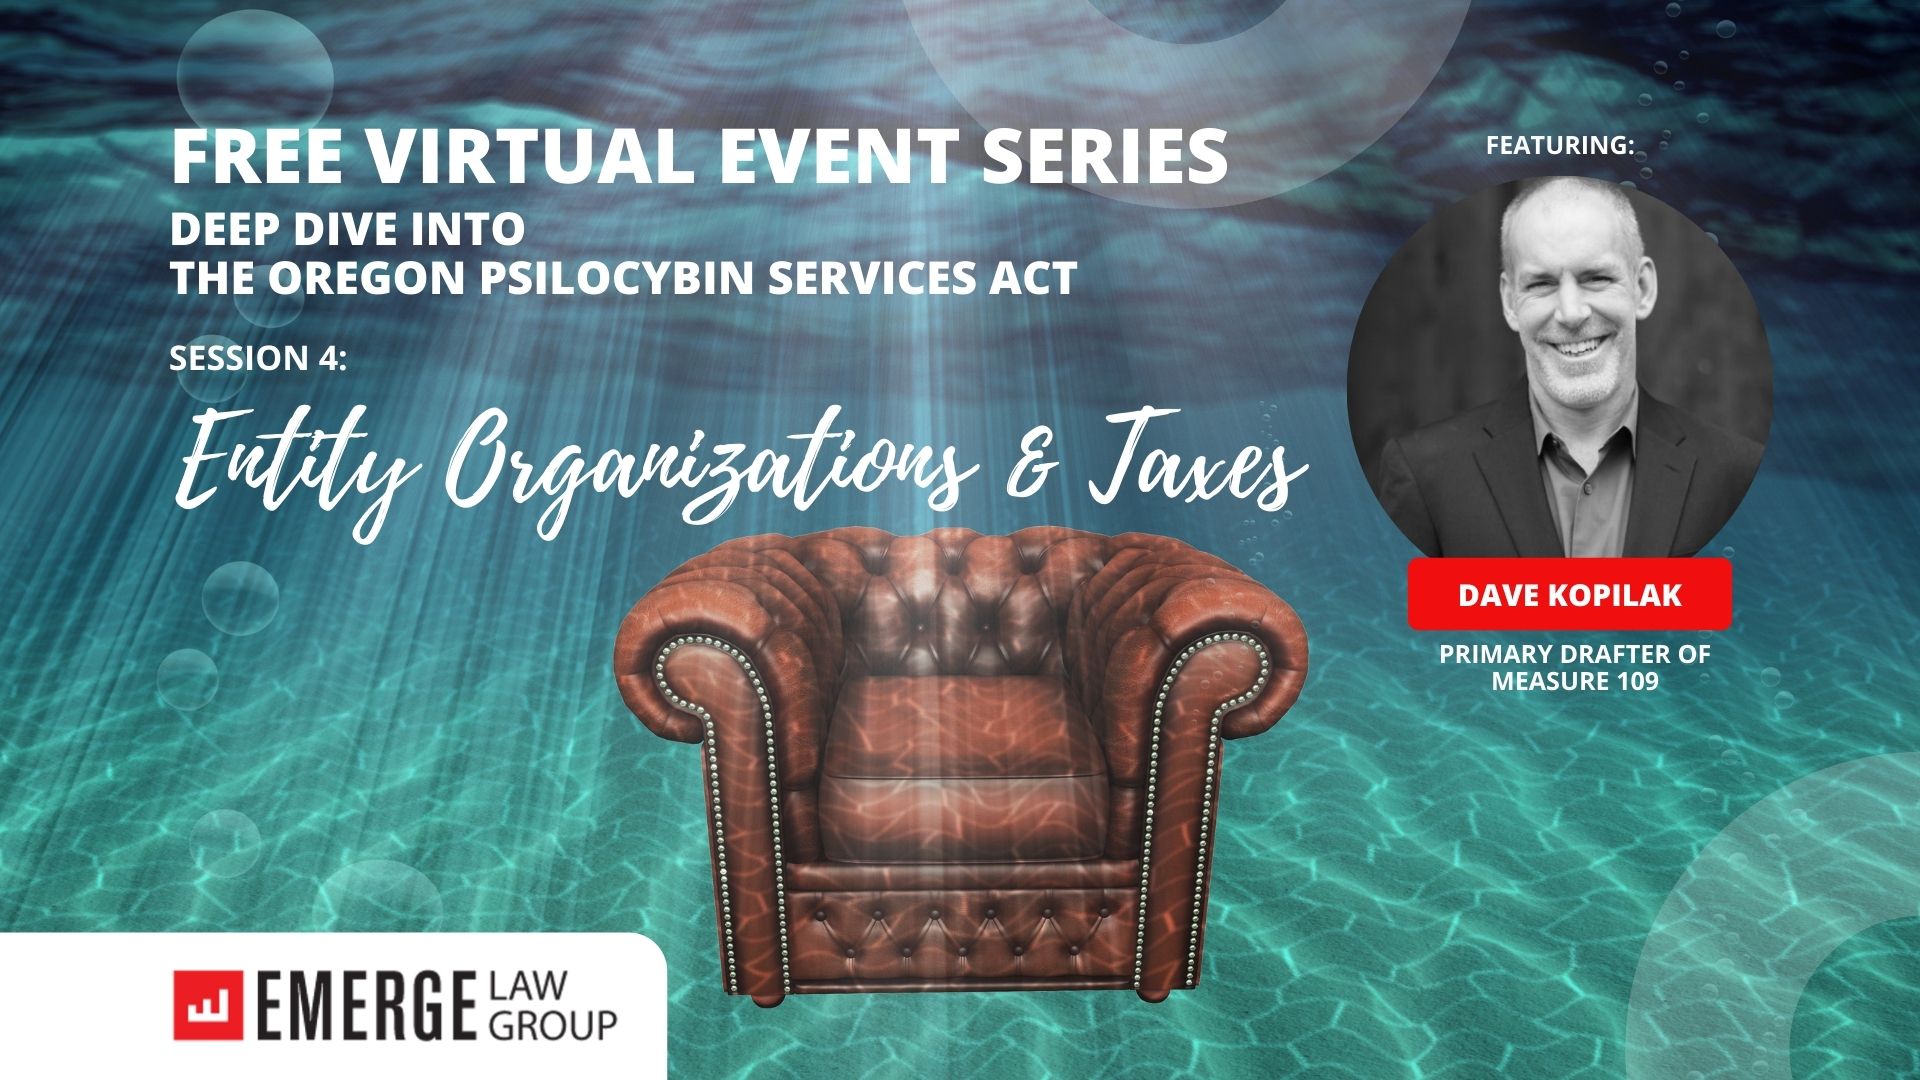 FREE Virtual Event Series – Deep Dive Into the Oregon Psilocybin Services Act:  Entity Organizations and Taxes (Session 4)